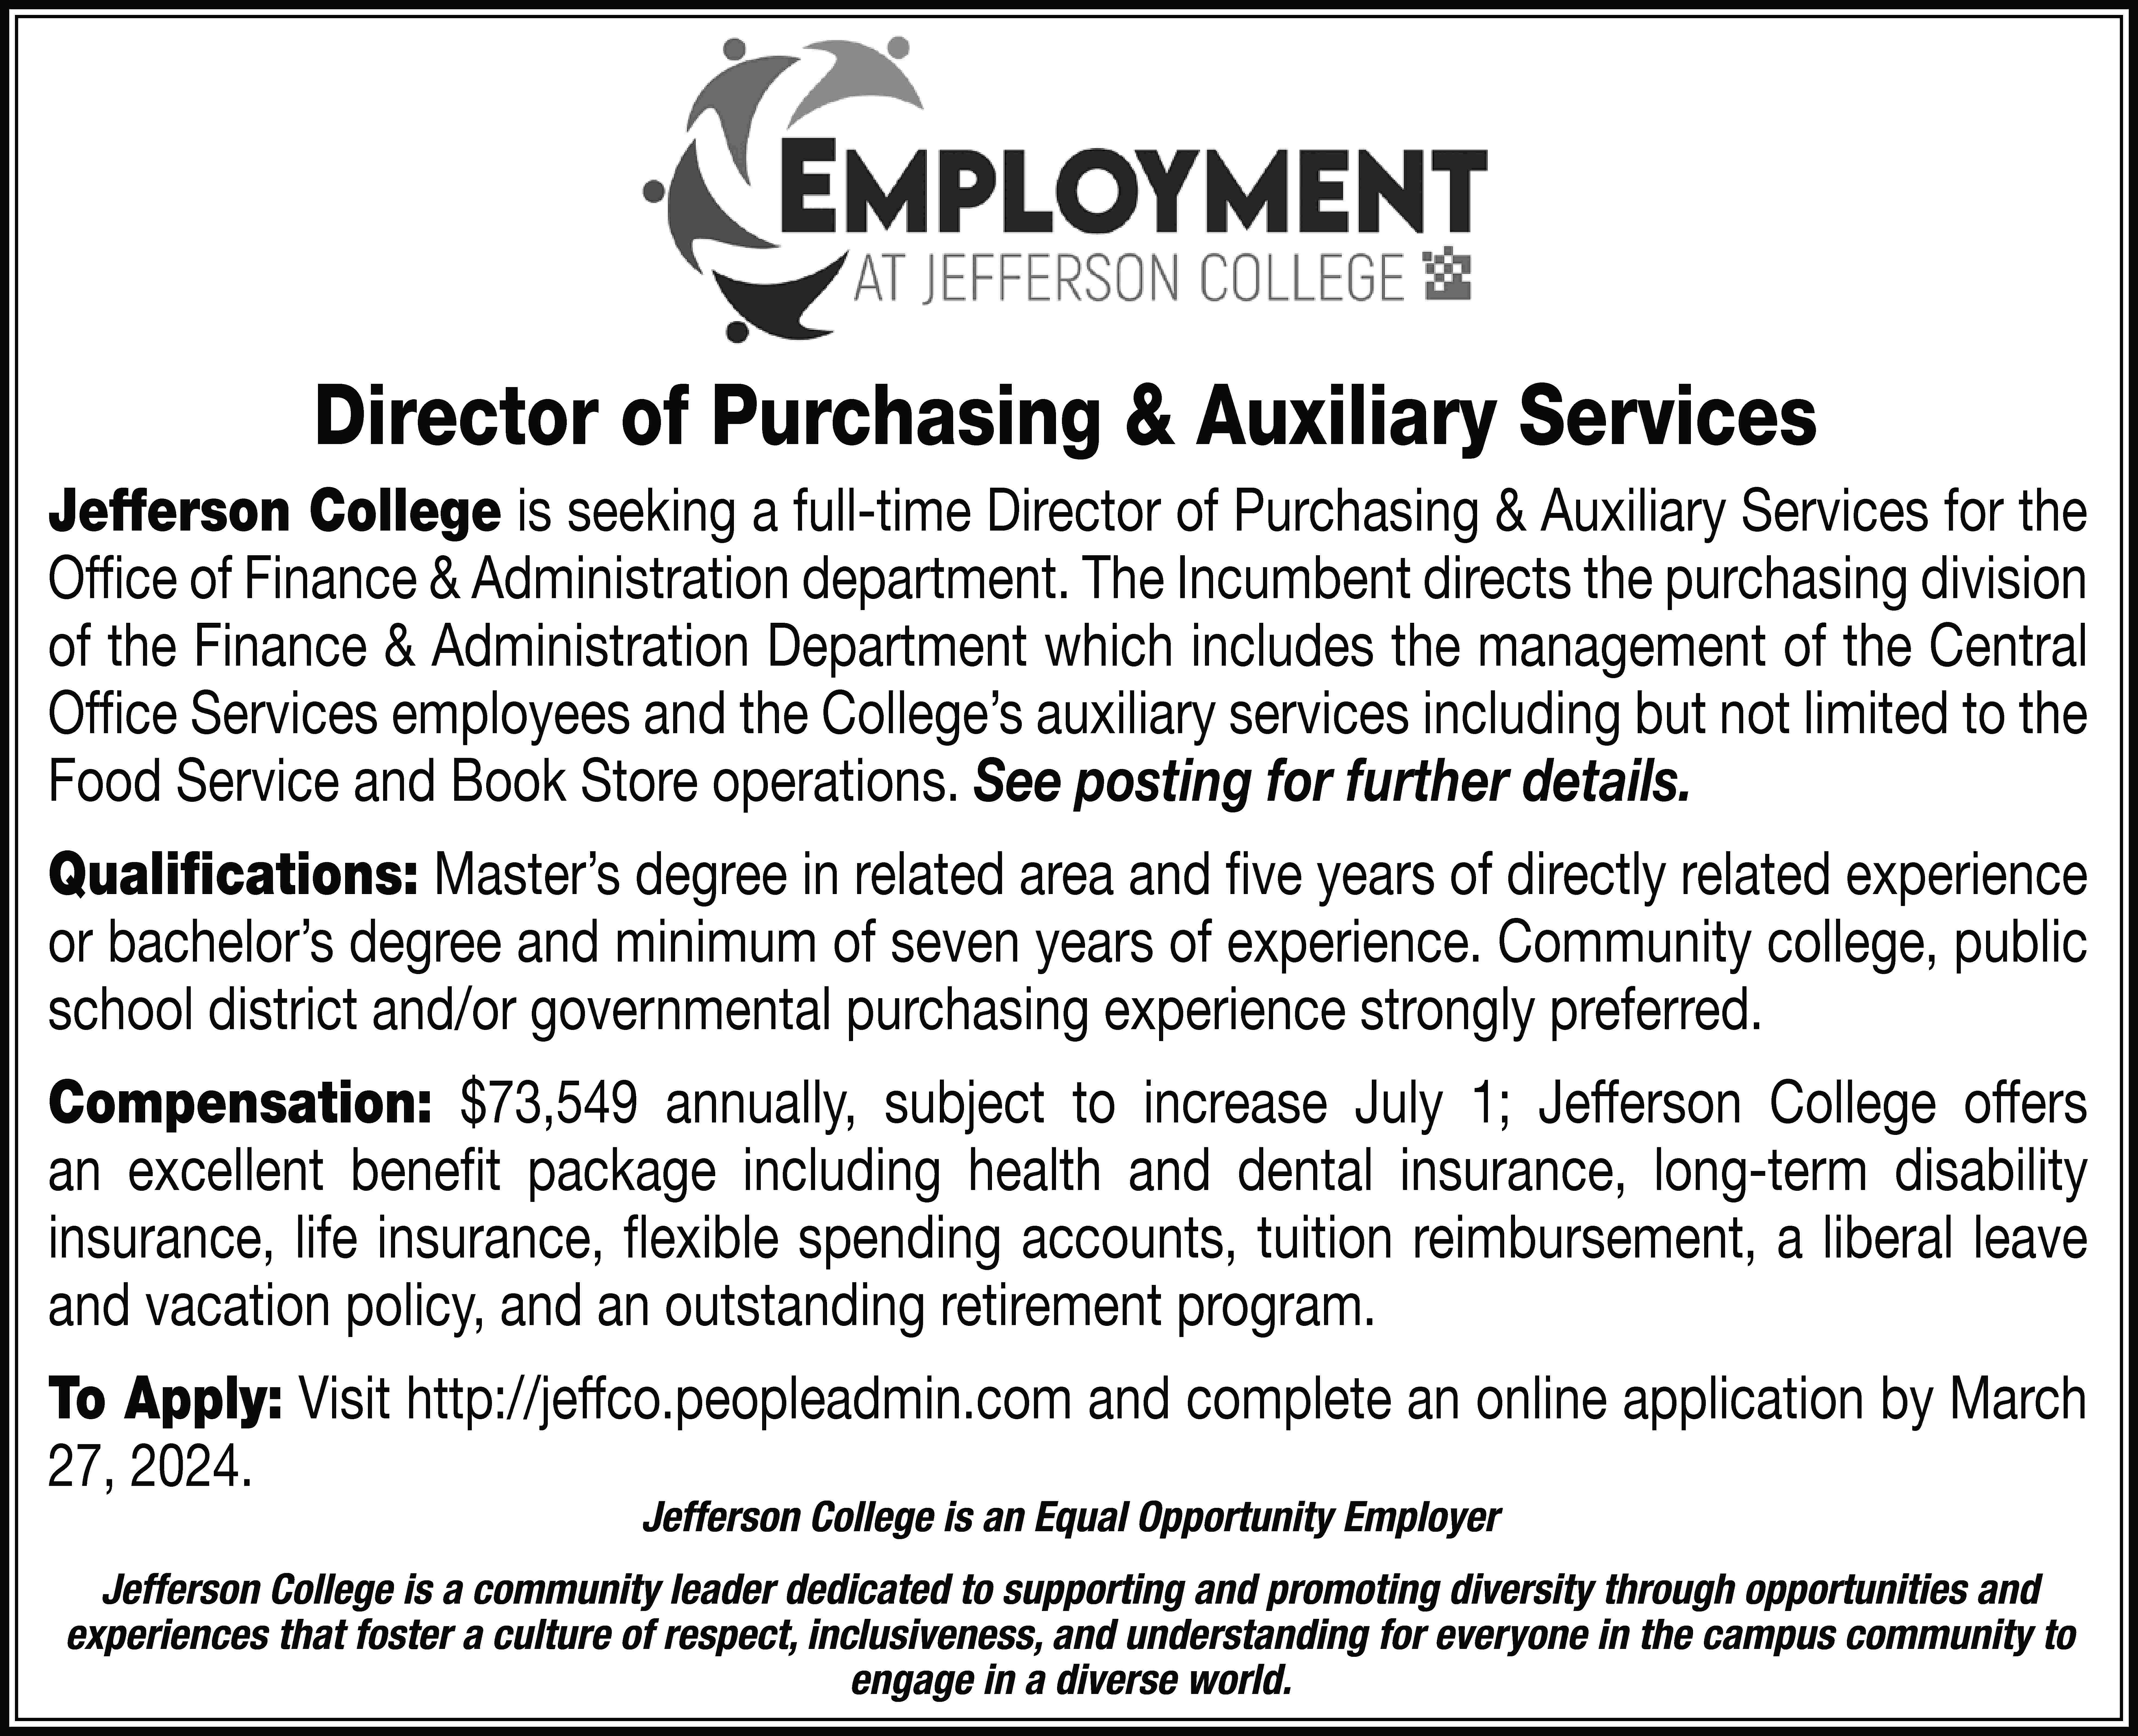 Director of Purchasing & Auxiliary  Director of Purchasing & Auxiliary Services Jefferson College is seeking a full-time Director of Purchasing & Auxiliary Services for the Office of Finance & Administration department. The Incumbent directs the purchasing division of the Finance & Administration Department which includes the management of the Central Office Services employees and the College’s auxiliary services including but not limited to the Food Service and Book Store operations. See posting for further details. Qualifications: Master’s degree in related area and five years of directly related experience or bachelor’s degree and minimum of seven years of experience. Community college, public school district and/or governmental purchasing experience strongly preferred. Compensation: $73,549 annually, subject to increase July 1; Jefferson College offers an excellent benefit package including health and dental insurance, long-term disability insurance, life insurance, flexible spending accounts, tuition reimbursement, a liberal leave and vacation policy, and an outstanding retirement program. To Apply: Visit http://jeffco.peopleadmin.com and complete an online application by March 27, 2024. Jefferson College is an Equal Opportunity Employer Jefferson College is a community leader dedicated to supporting and promoting diversity through opportunities and experiences that foster a culture of respect, inclusiveness, and understanding for everyone in the campus community to engage in a diverse world.